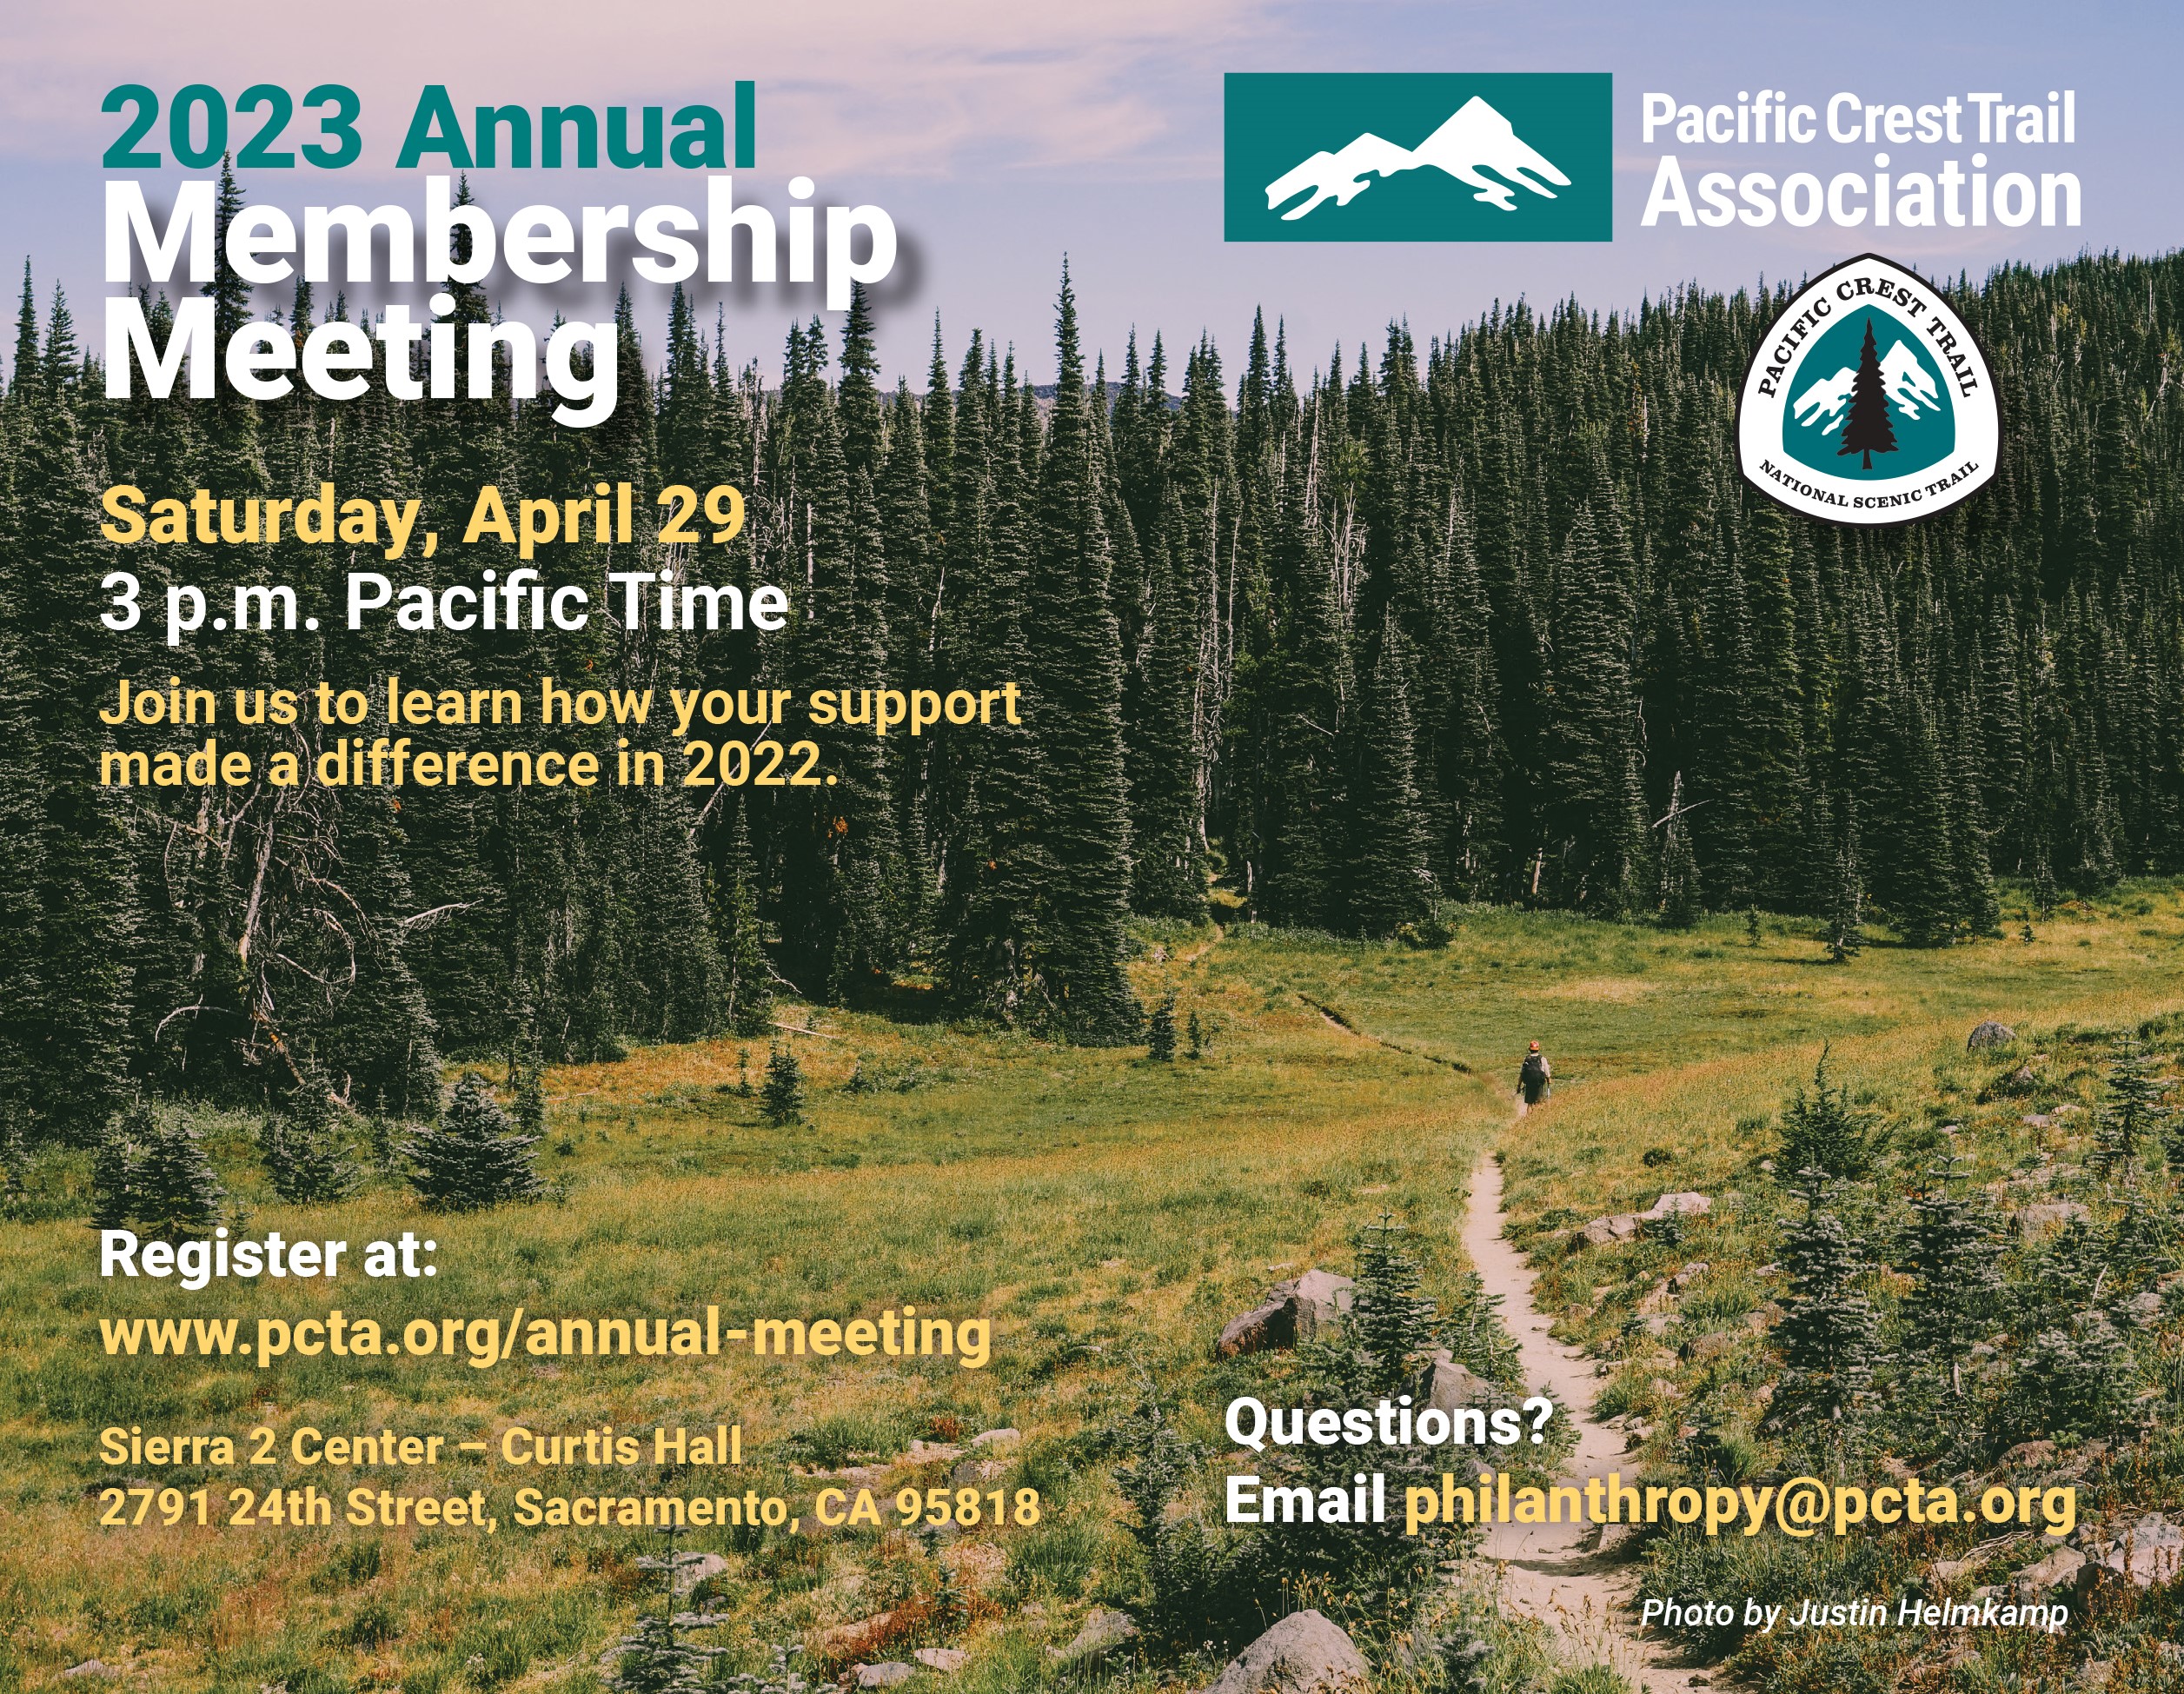 2023 Annual Membership Meeting - Pacific Crest Association